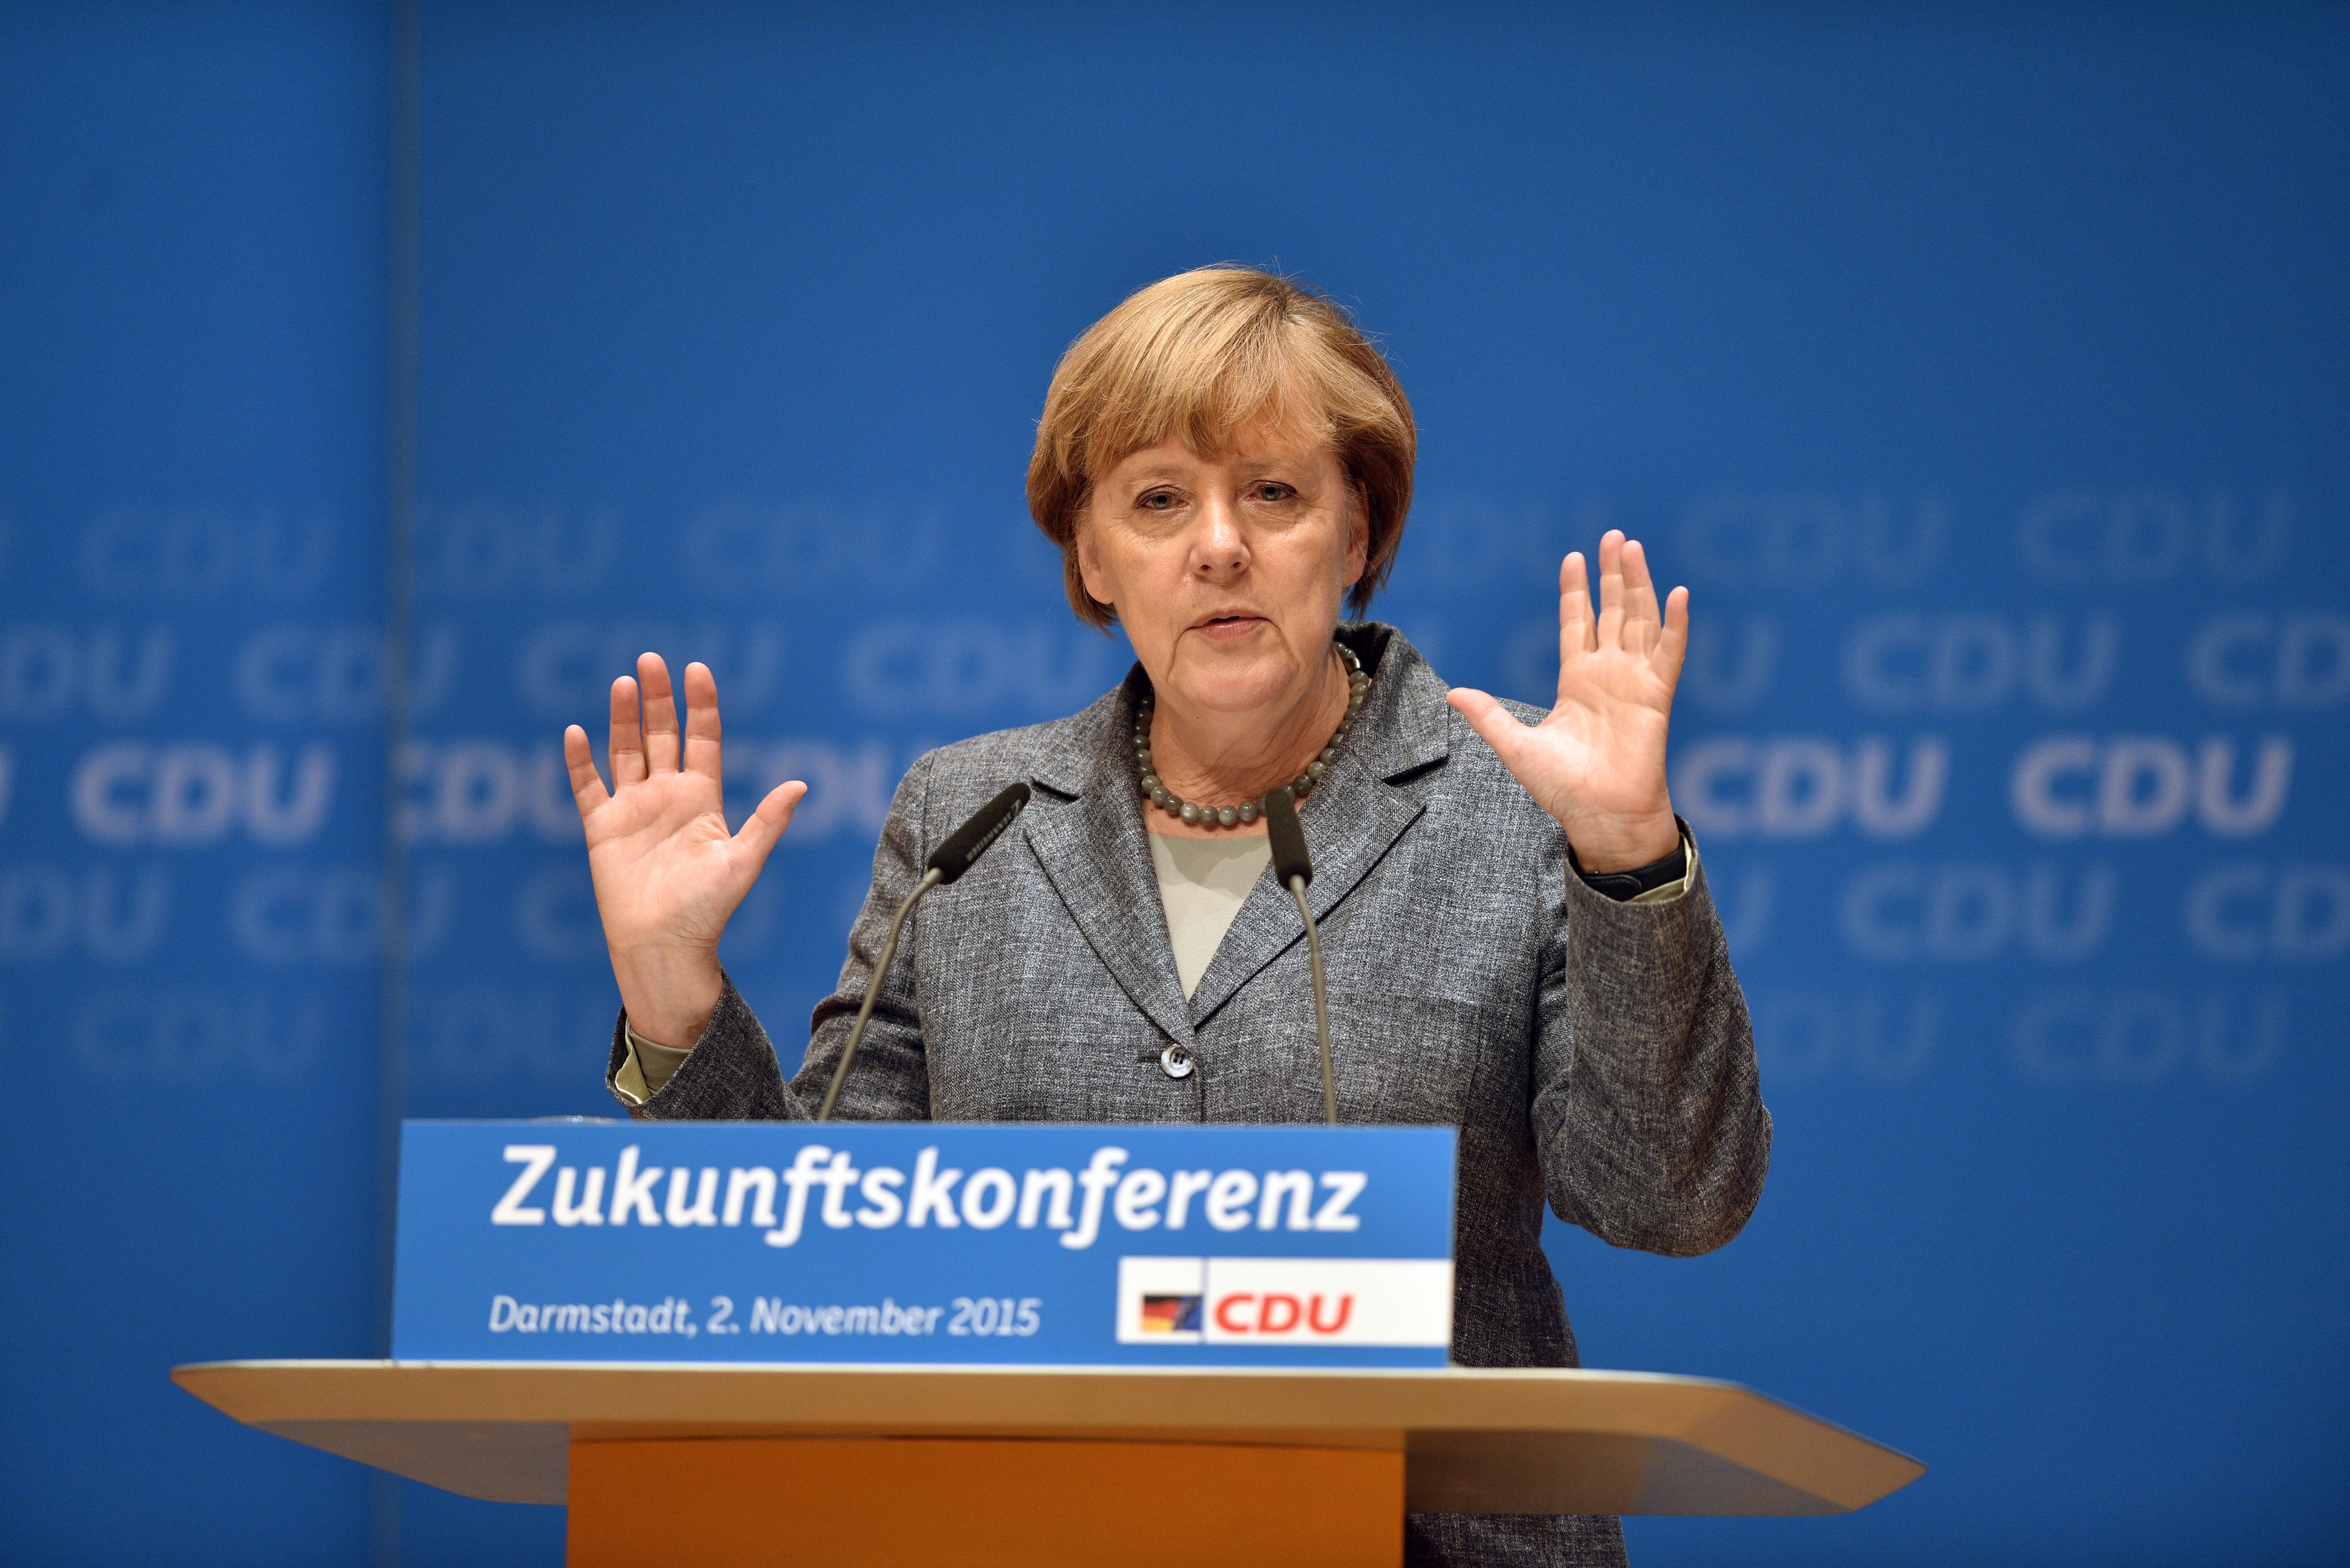 German Chancellor and Chairwoman of the German Christian Democrats (CDU) Angelika Merkel speaks to CDU members while attending a regional "Future Conference" on Nov. 2, 2015 in Darmstadt, Germany. (Thomas Lohnes&amp;—Getty Images)